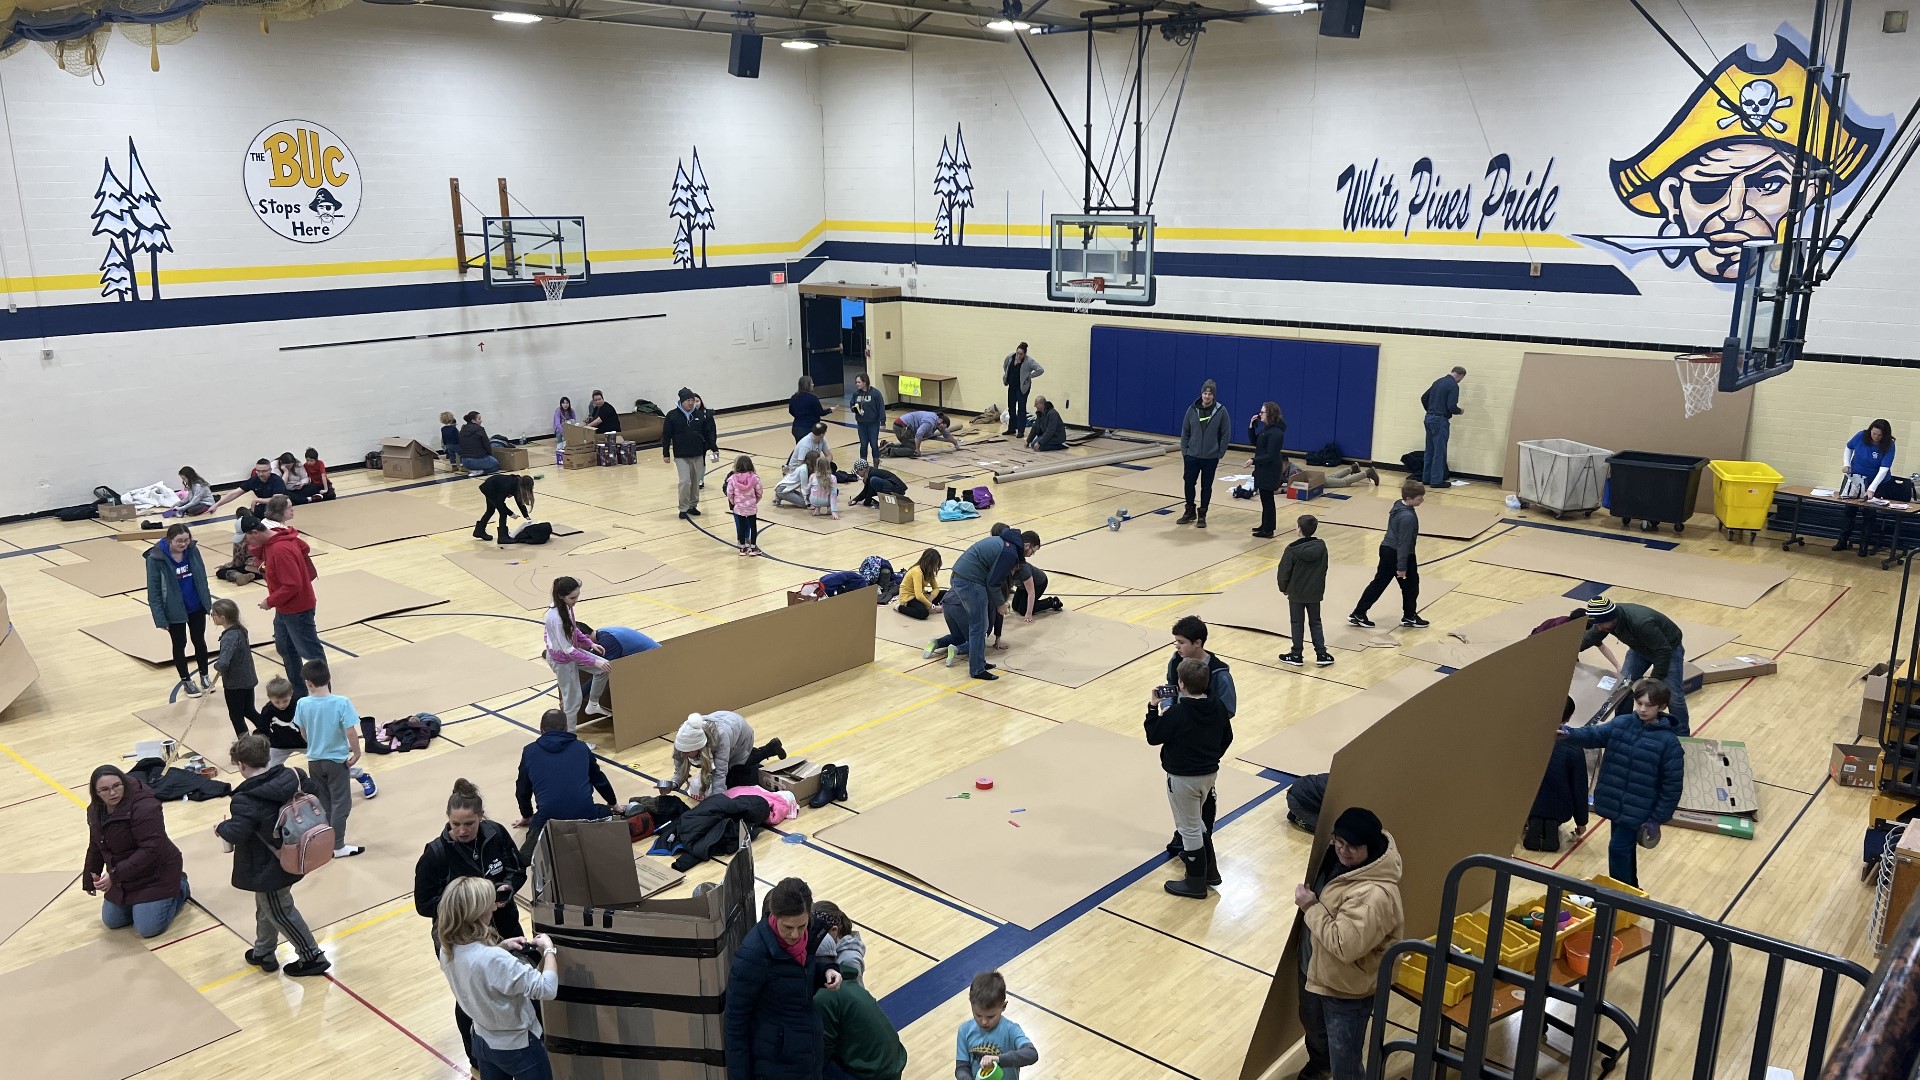 White Pines Middle School in Grand Haven tonight hosted a "cardboard sled build" night.